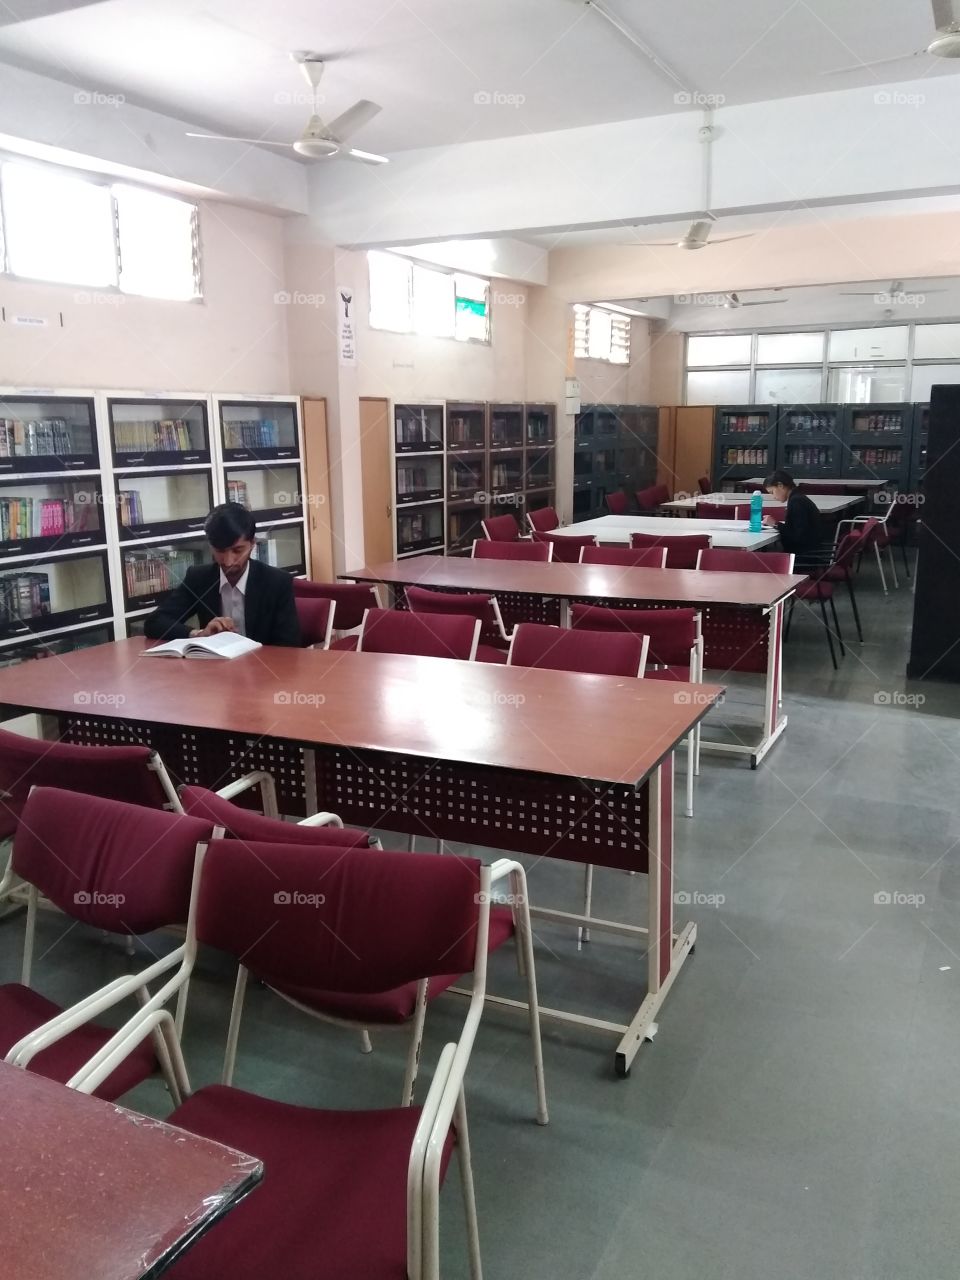 LIBRARY 2